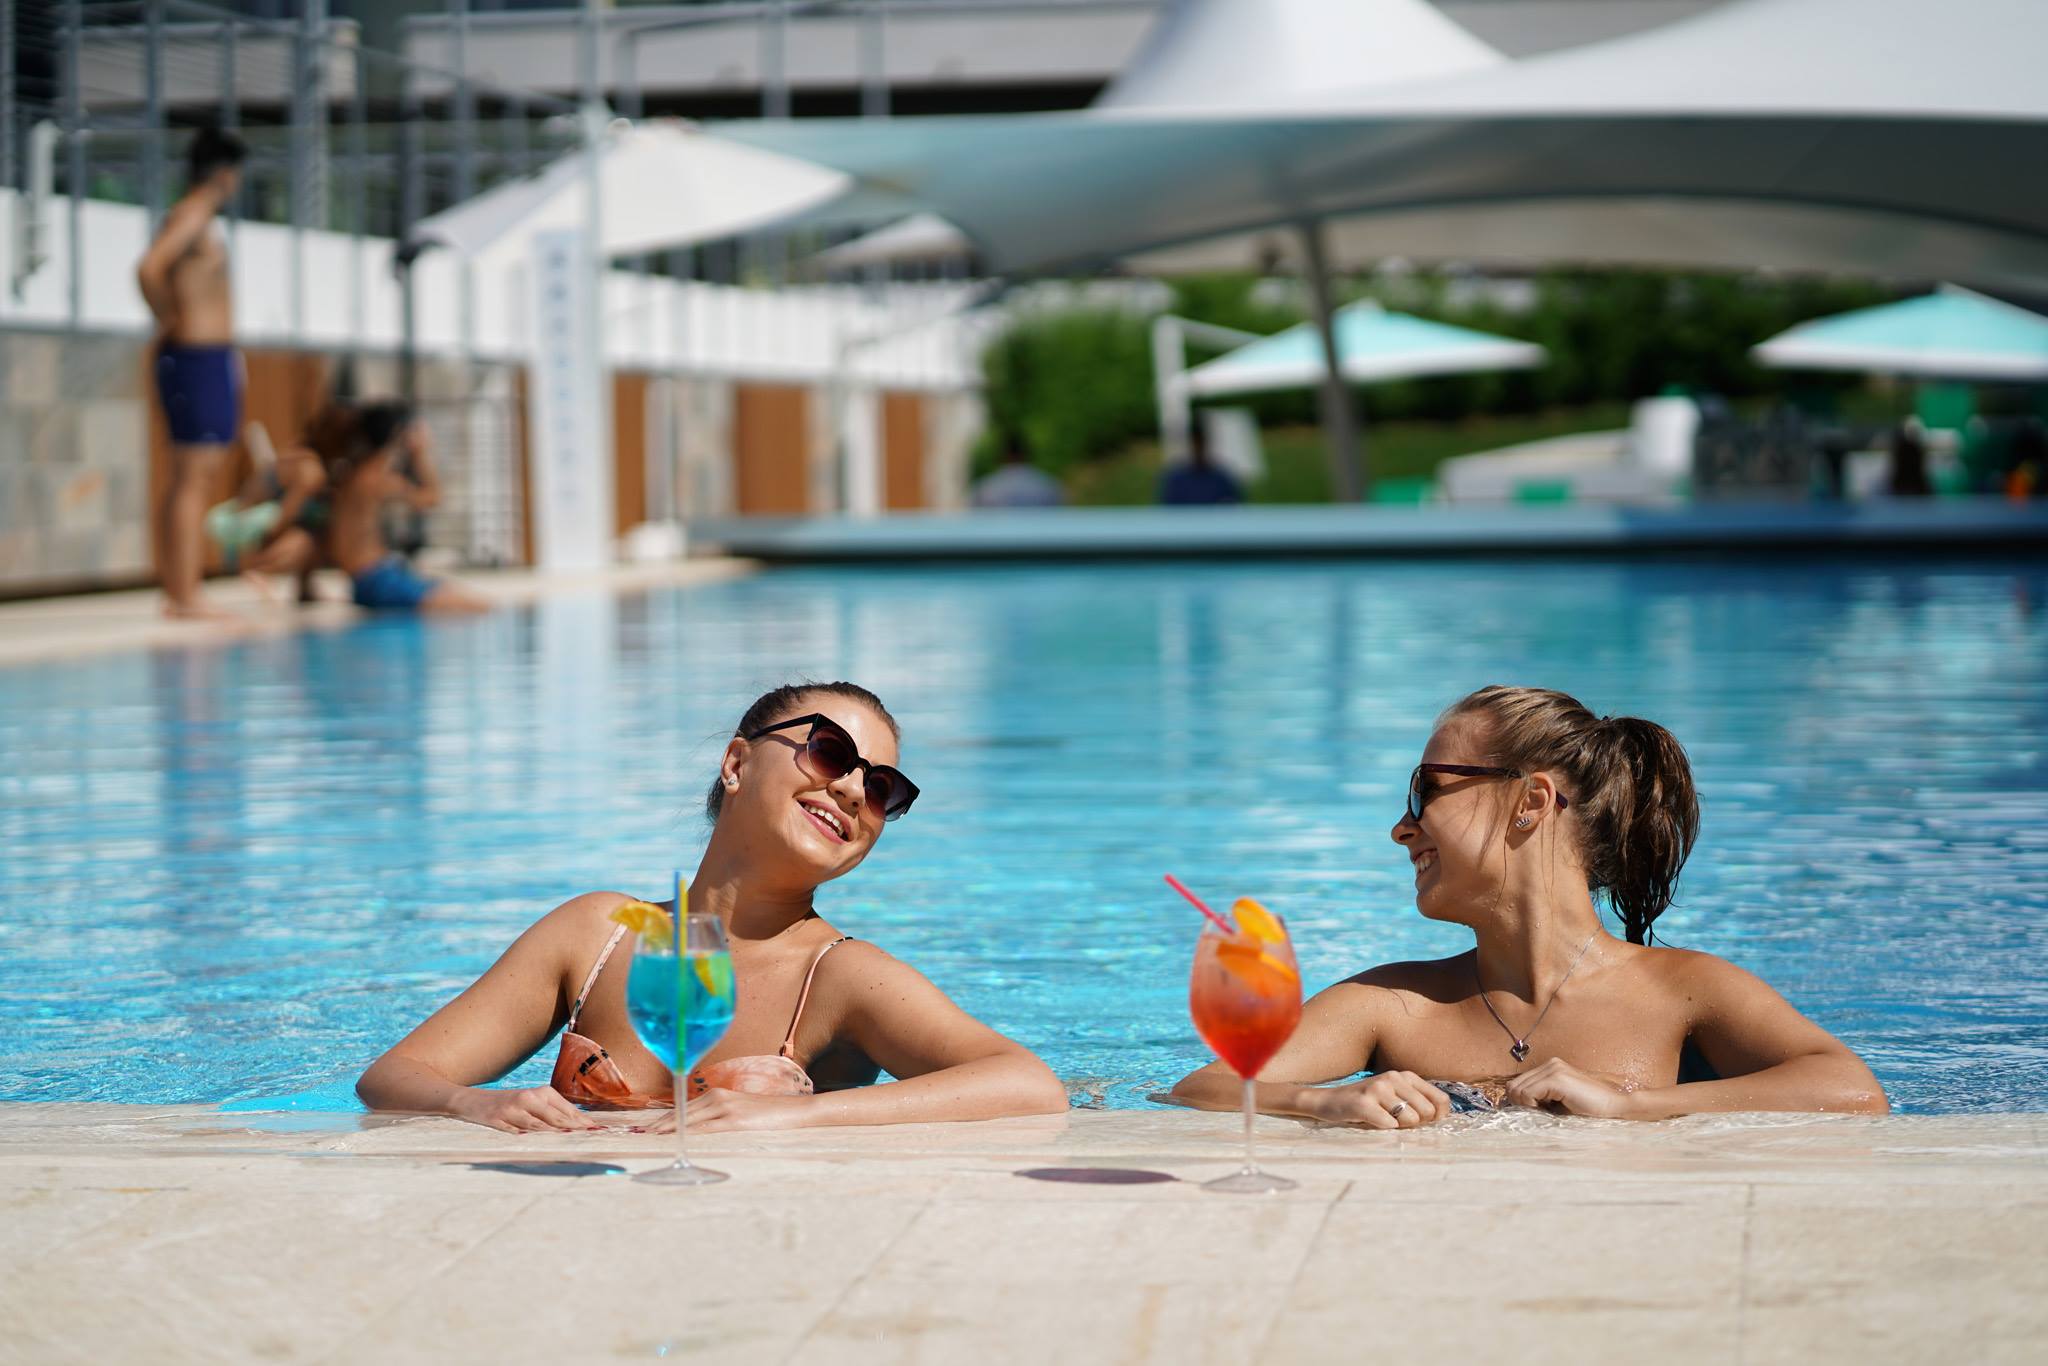 Crazy Pool by West Gate - Best Pools and Waterparks in Bucharest